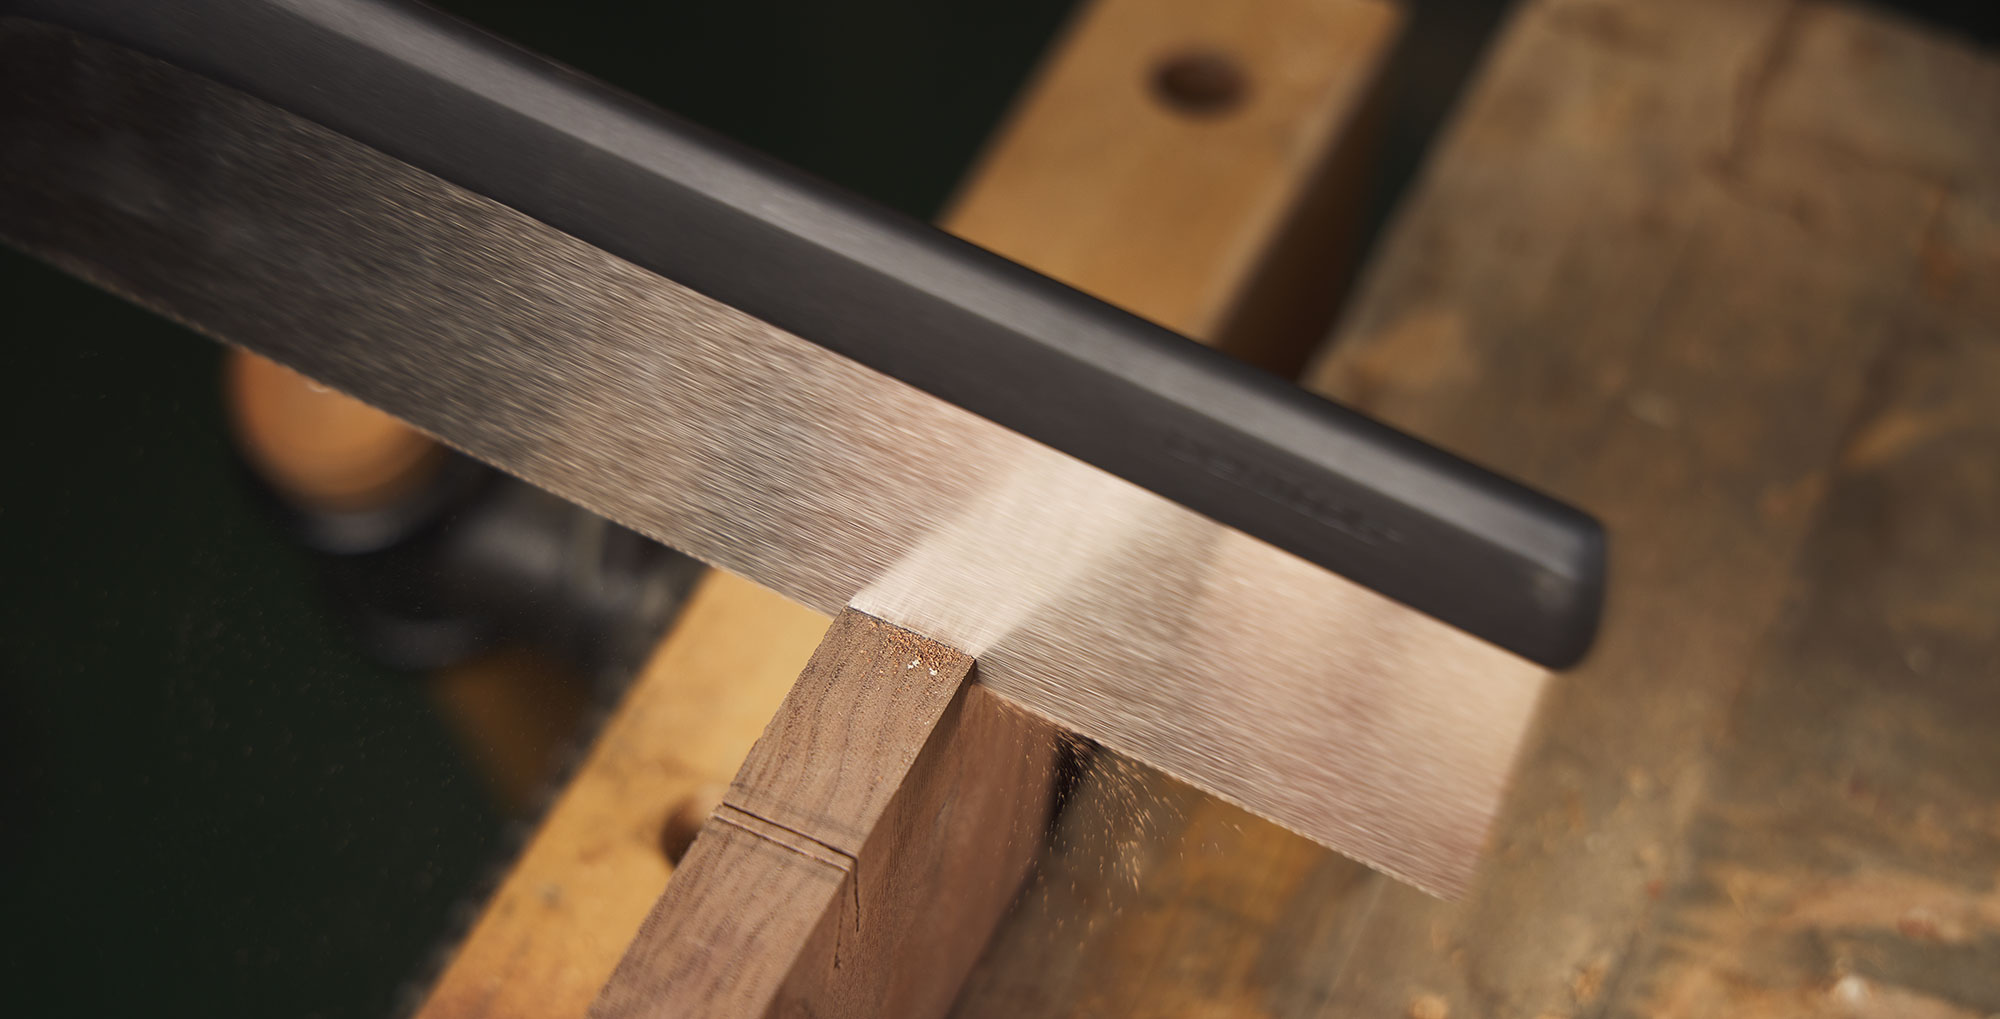 Close-up of saw blade cutting a dovetail joint